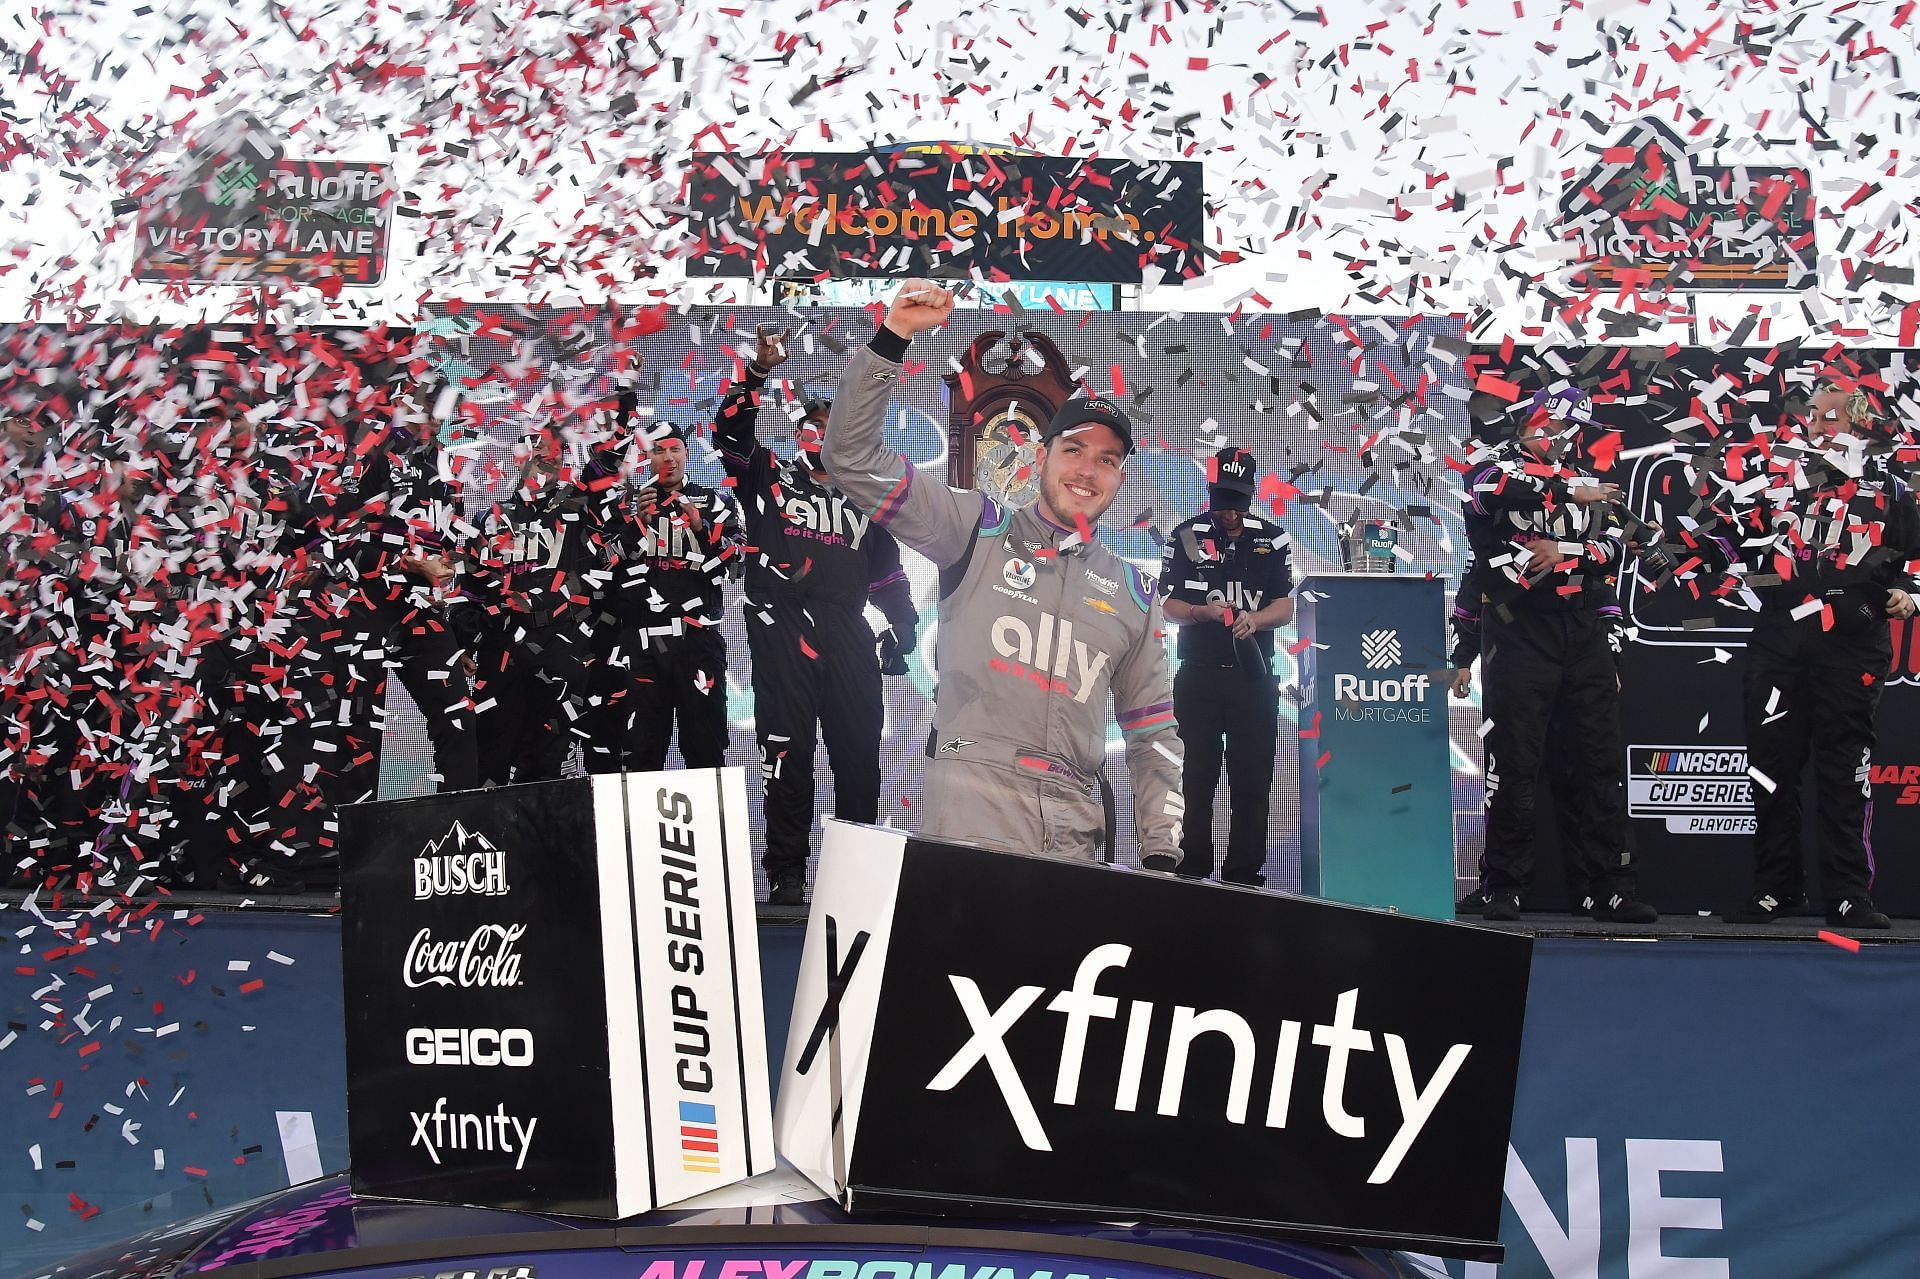 Alex Bowman, driver of the #48 Ally Chevrolet, celebrates in the Ruoff Mortgage victory lane after winning the NASCAR Cup Series Xfinity 500 at Martinsville Speedway on October 31, 2021 in Martinsville, Virginia. (Photo by Logan Riely/Getty Images)